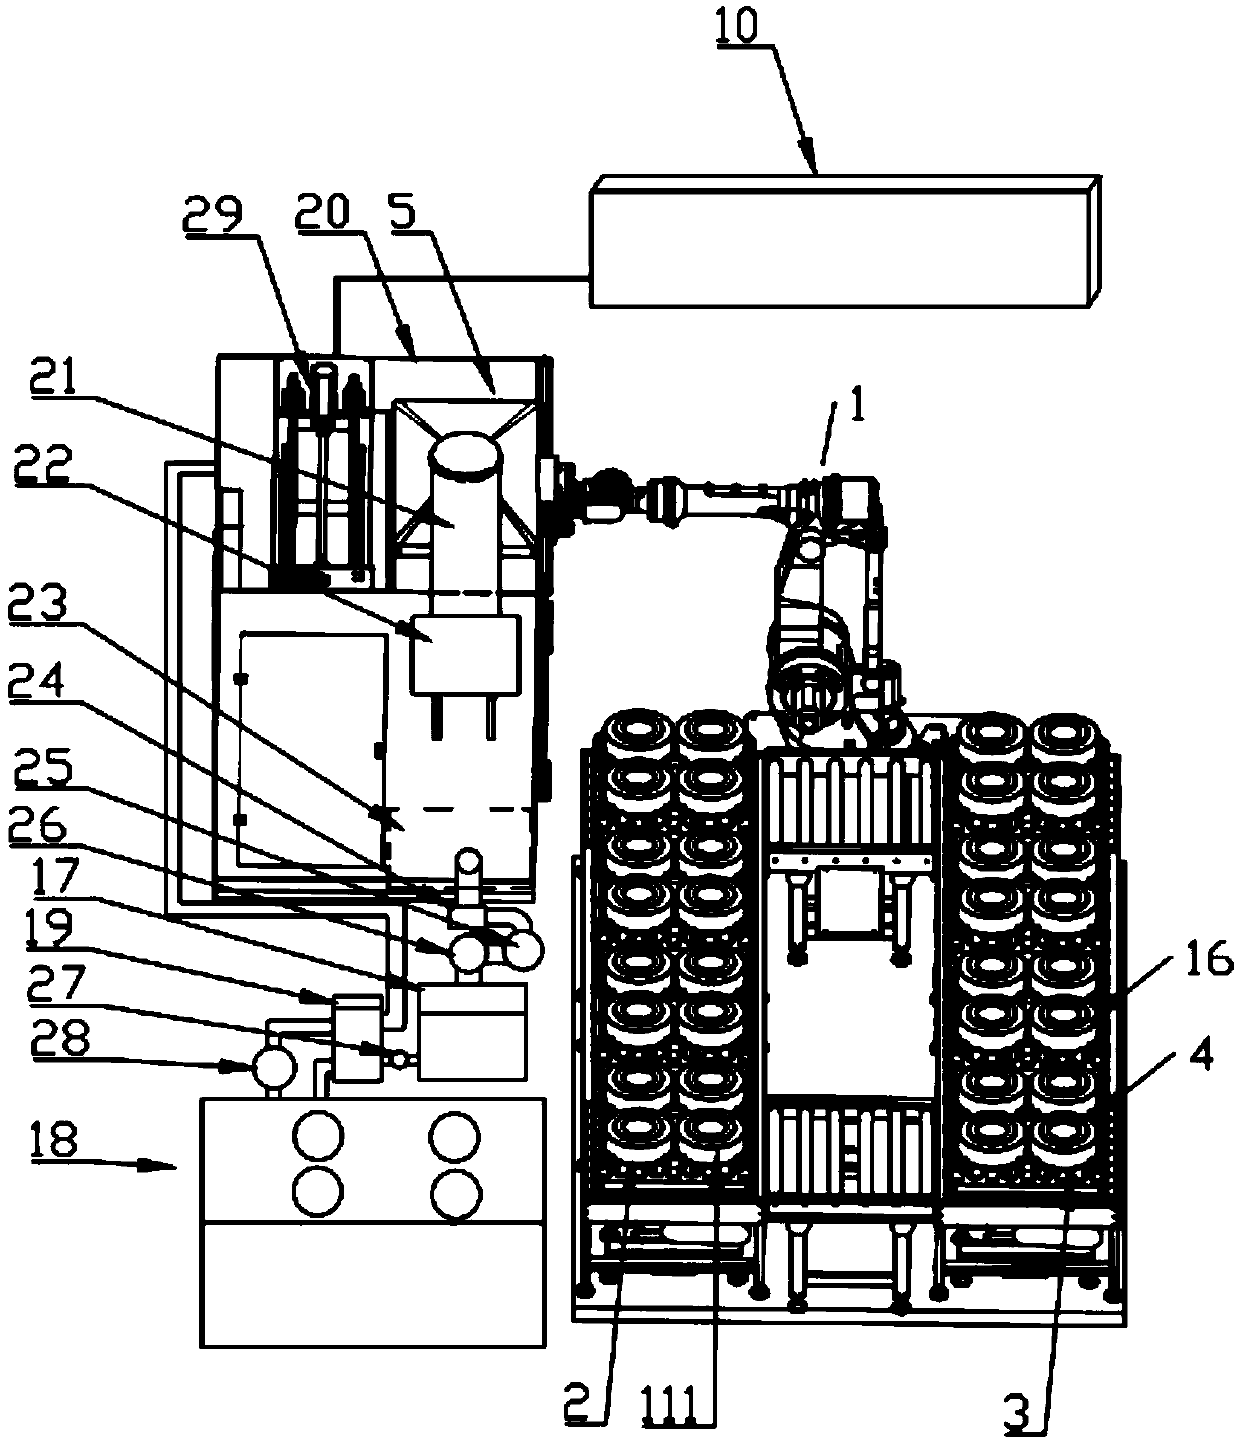 Full-automatic induction quenching machine tool for conical face of front machine cylinder of molding machine and circuit protecting method